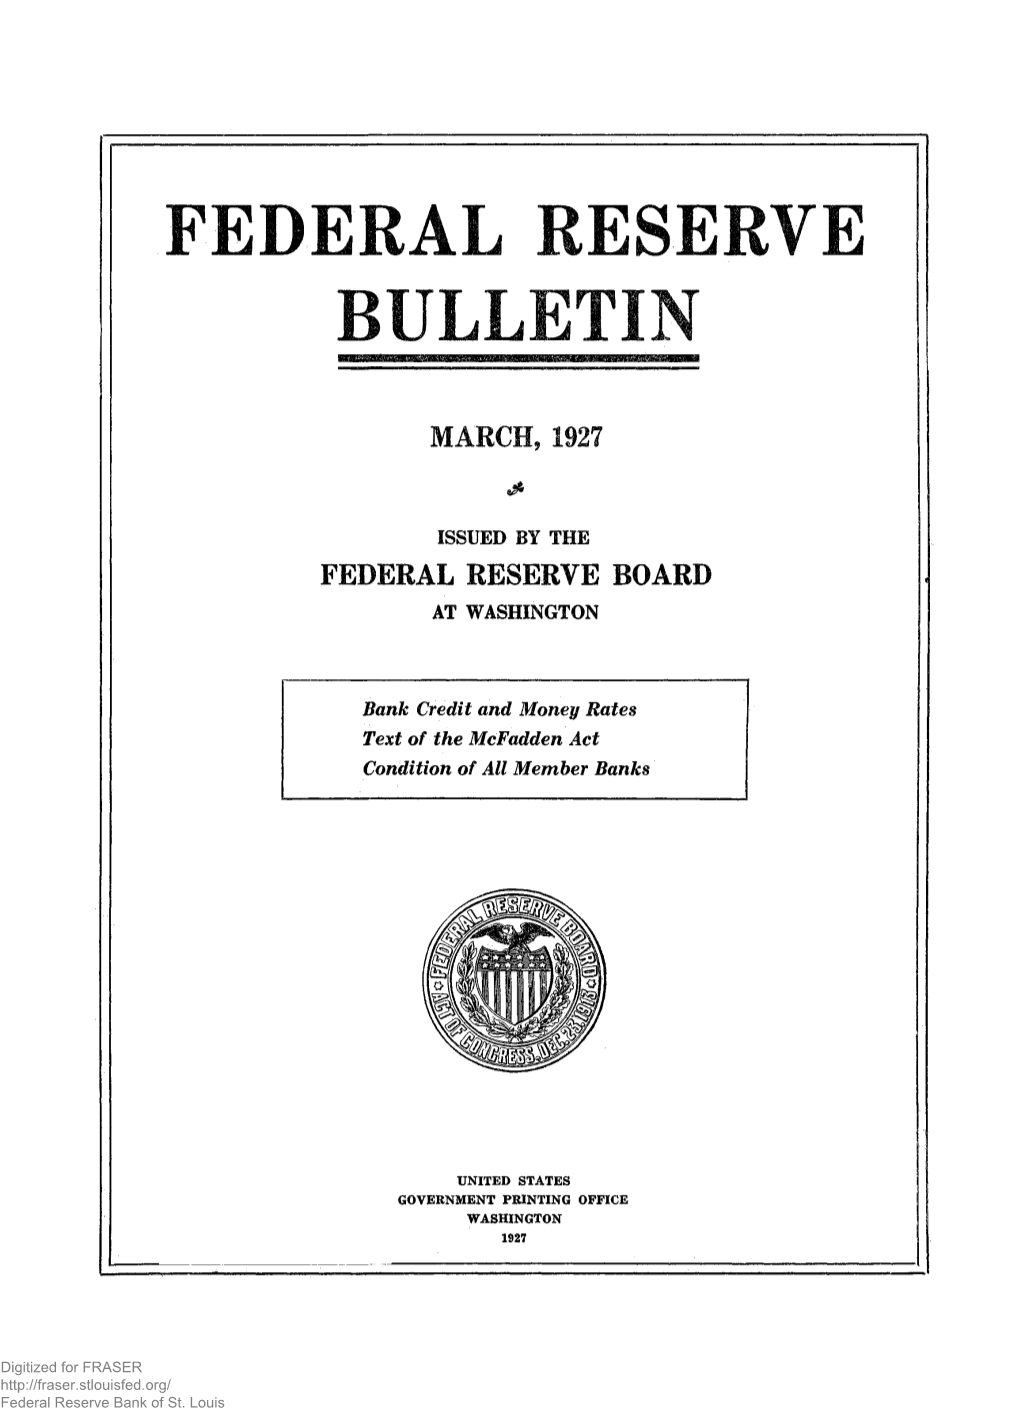 Federal Reserve Bulletin March 1927